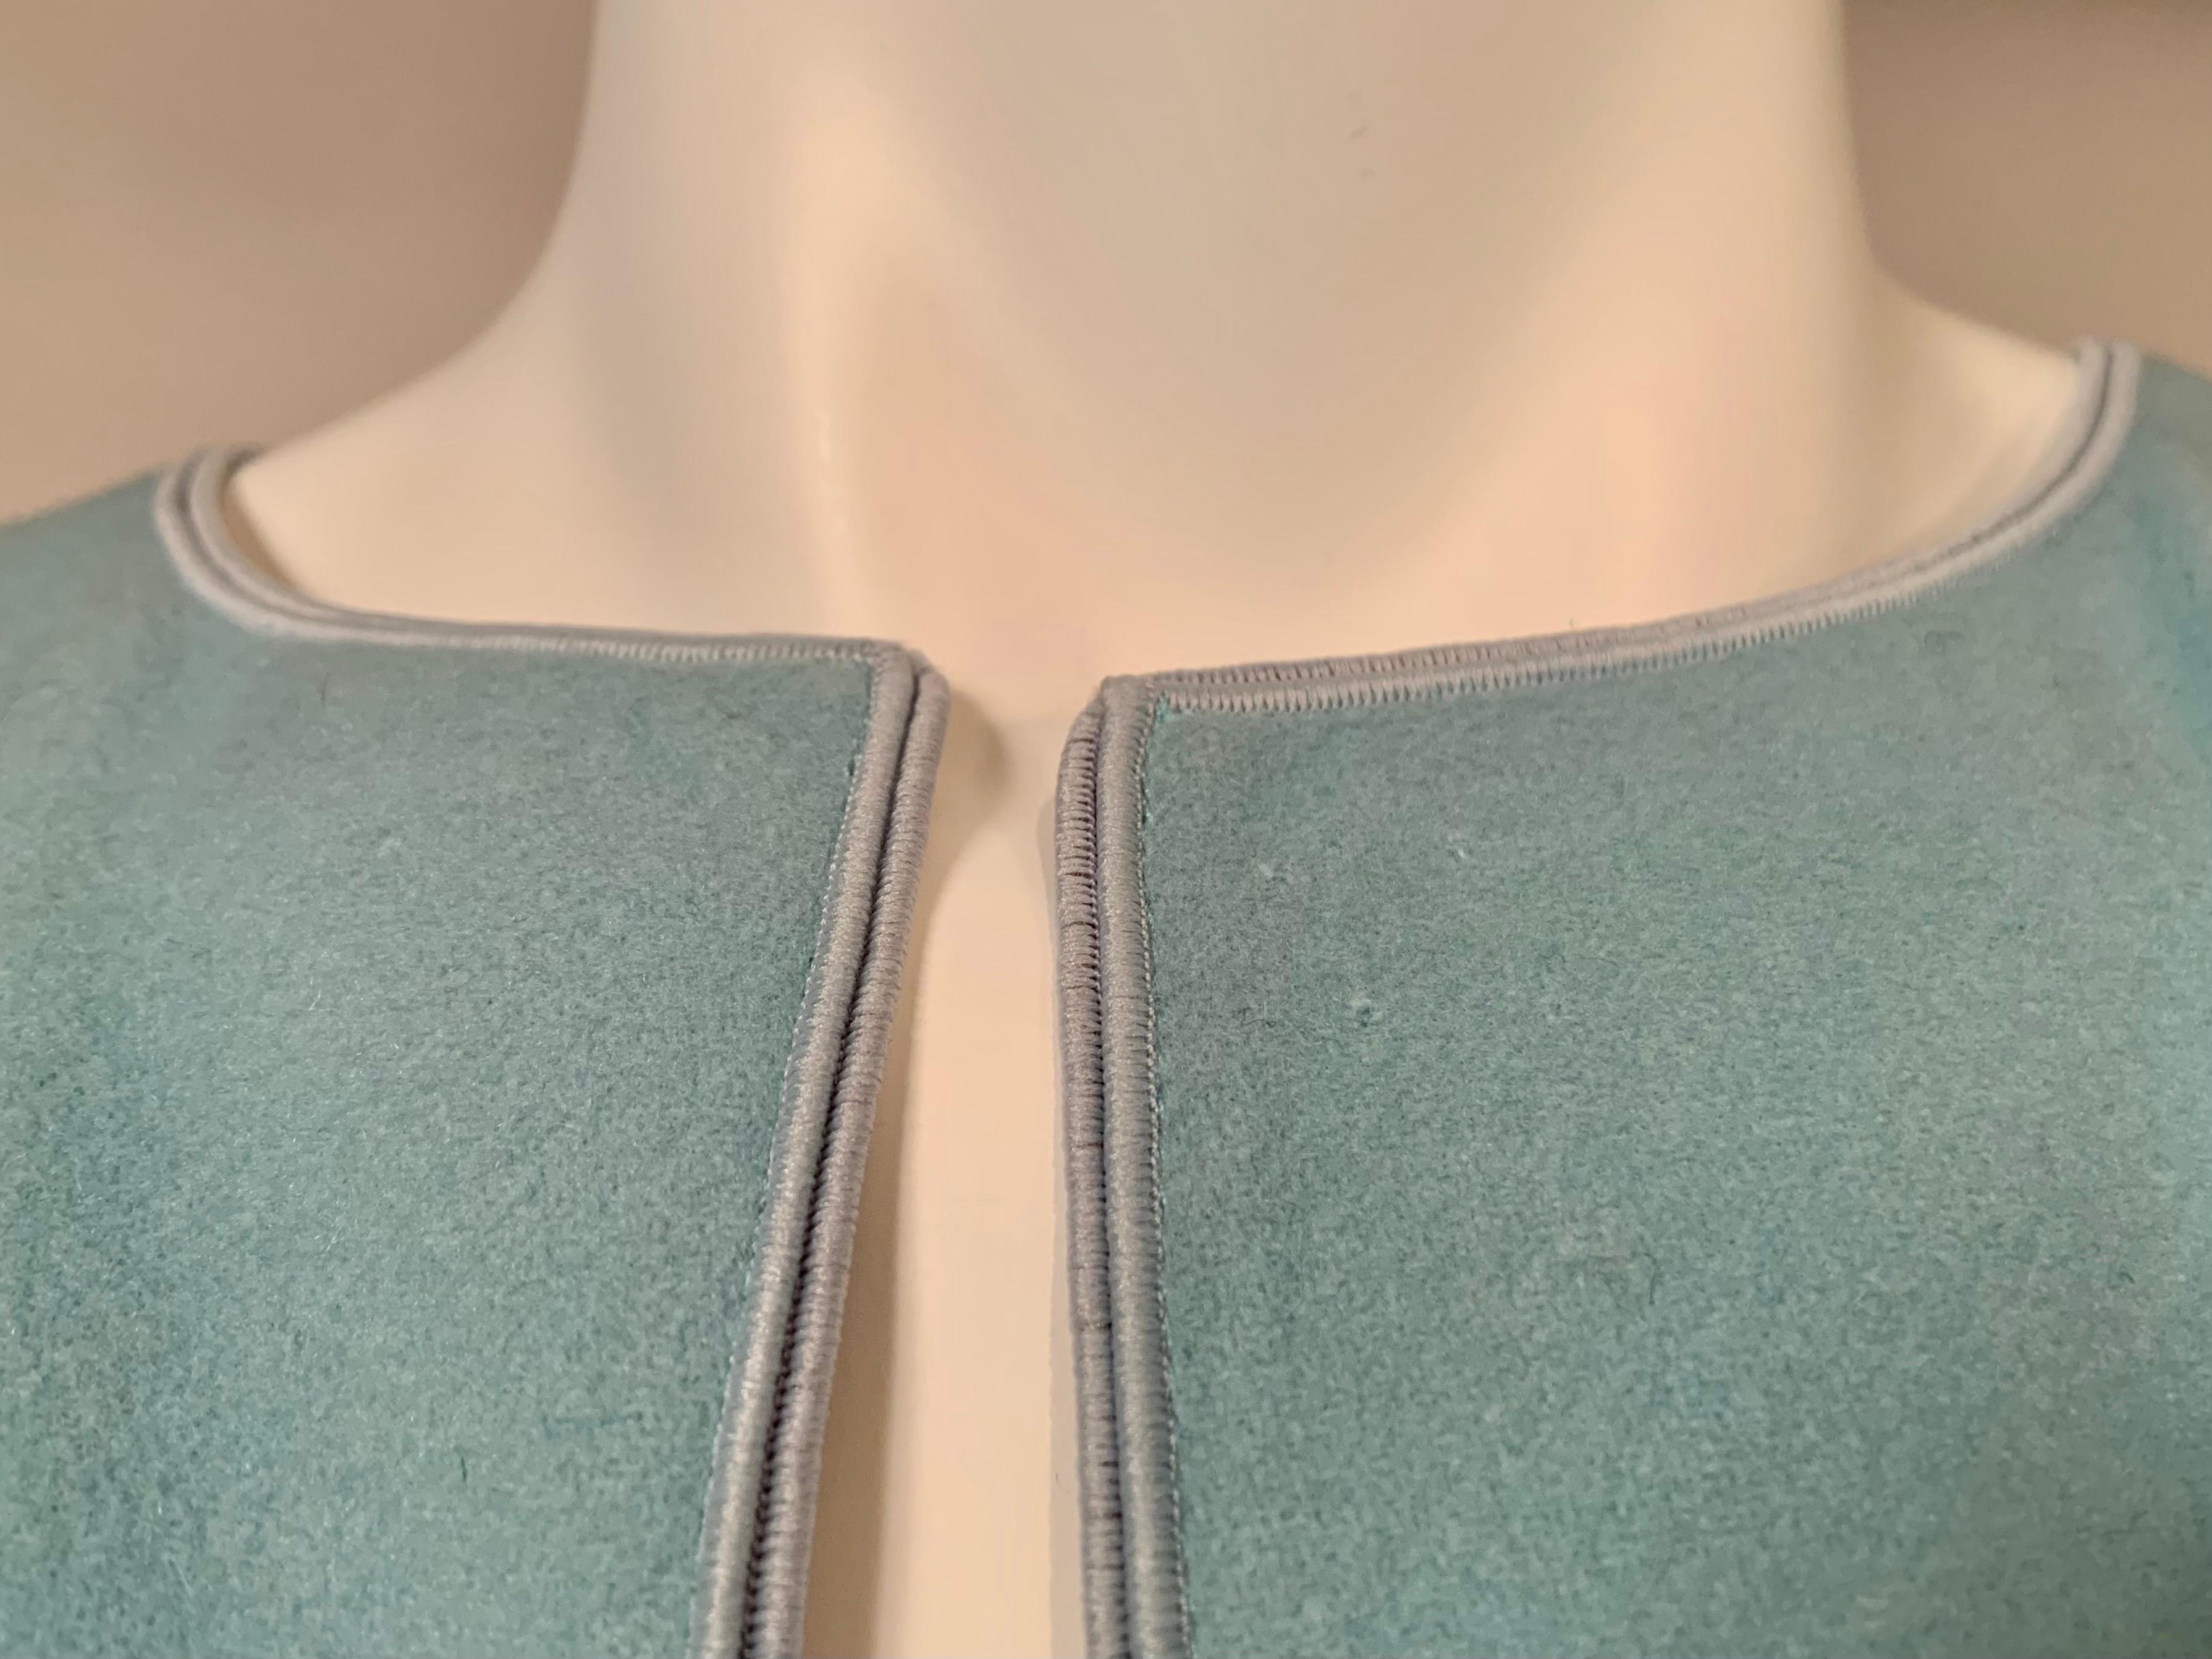 This beautiful Piazza Sempione light blue cashmere blend short cape has never been worn and still bears the original price tag of $950.00.  It is trimmed with a matching blue braid and there are no closures allowing you to drape the piece in a